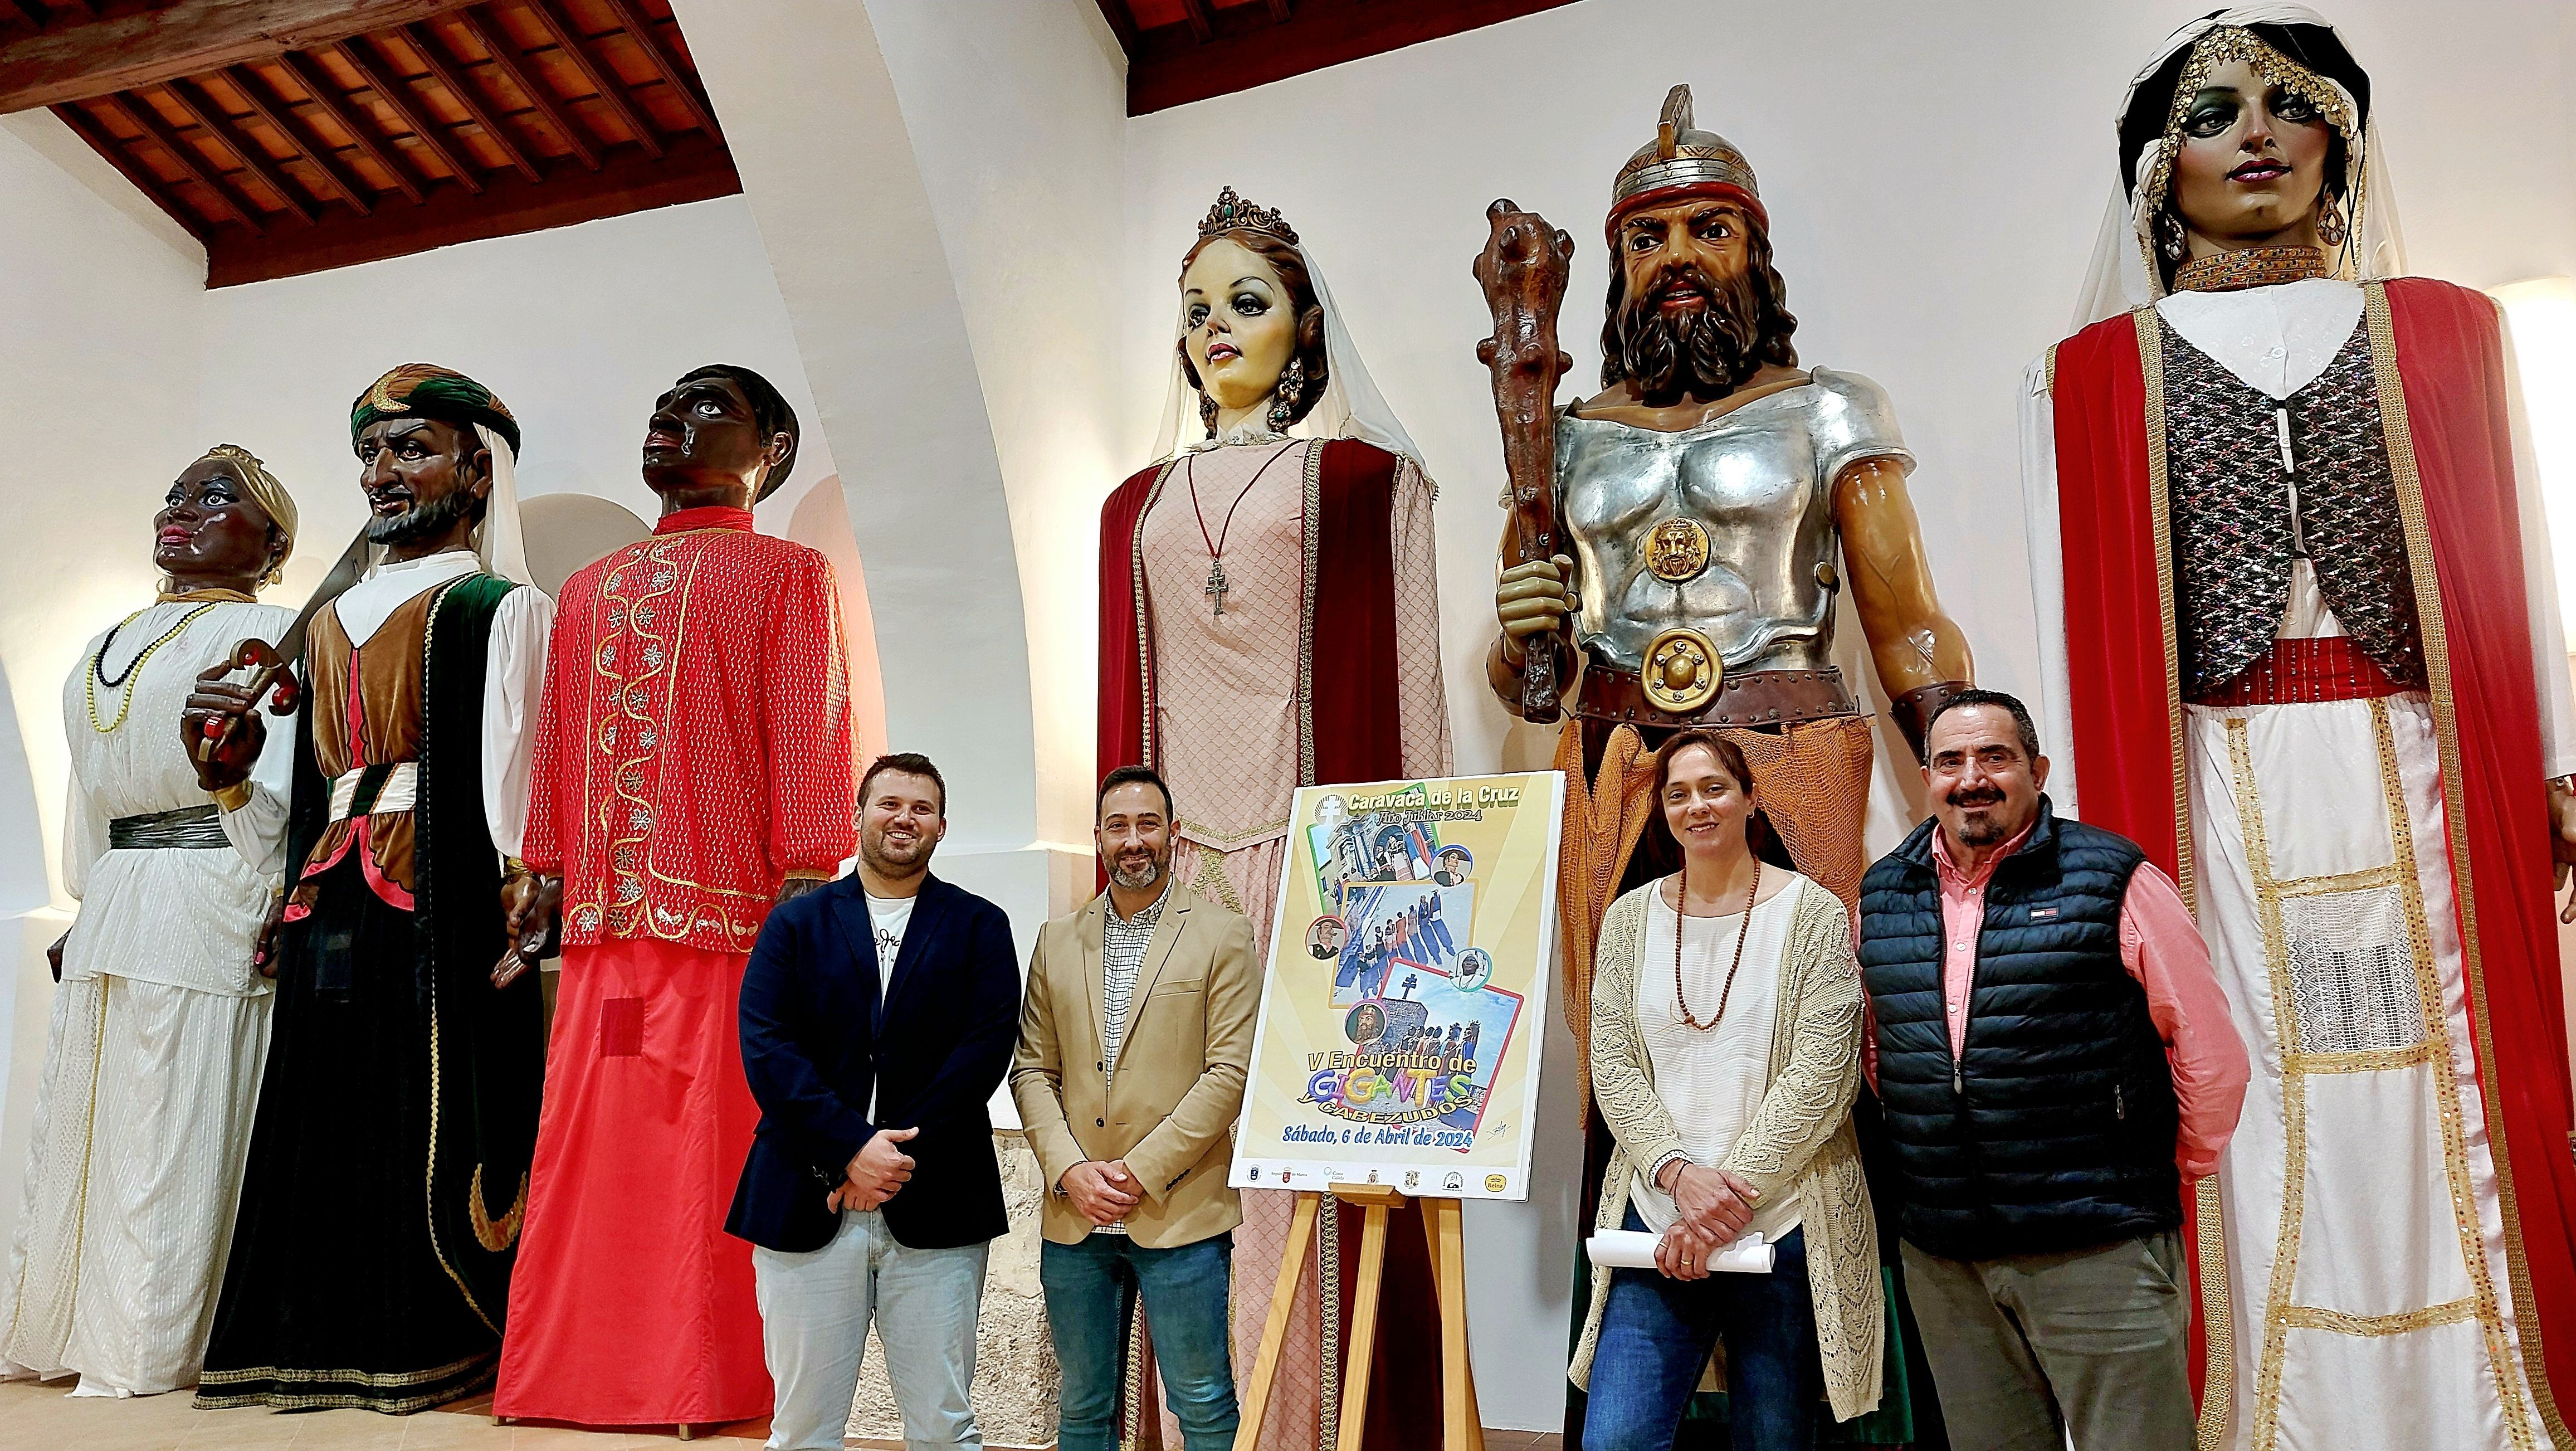 The V National Meeting of Giants will bring together populations from Catalonia, Valencia and Murcia in Caravaca